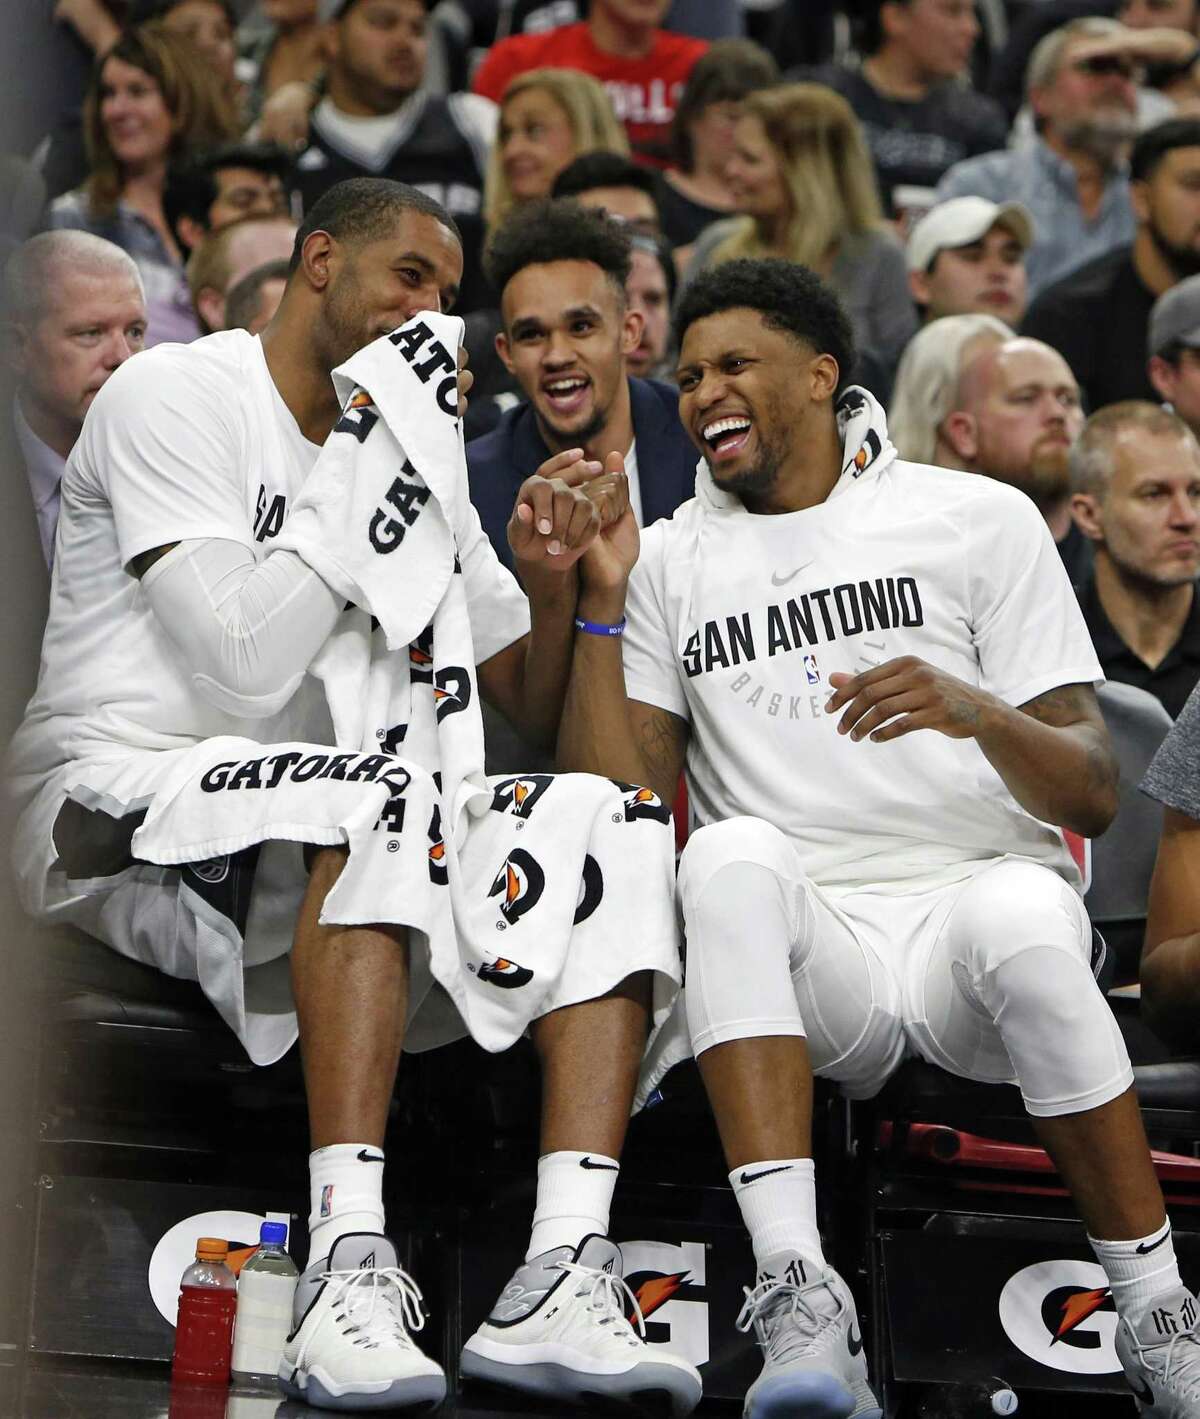 LaMarcus Aldridge #12 of the San Antonio Spurs,L, and Rudy Gay #22 of the San Antonio Spurs enjoy a light moment on the bench during the fourth quarter in a NBA game between San Antonio Spurs Chicago Bulls on Saturday, November 11, 2017.